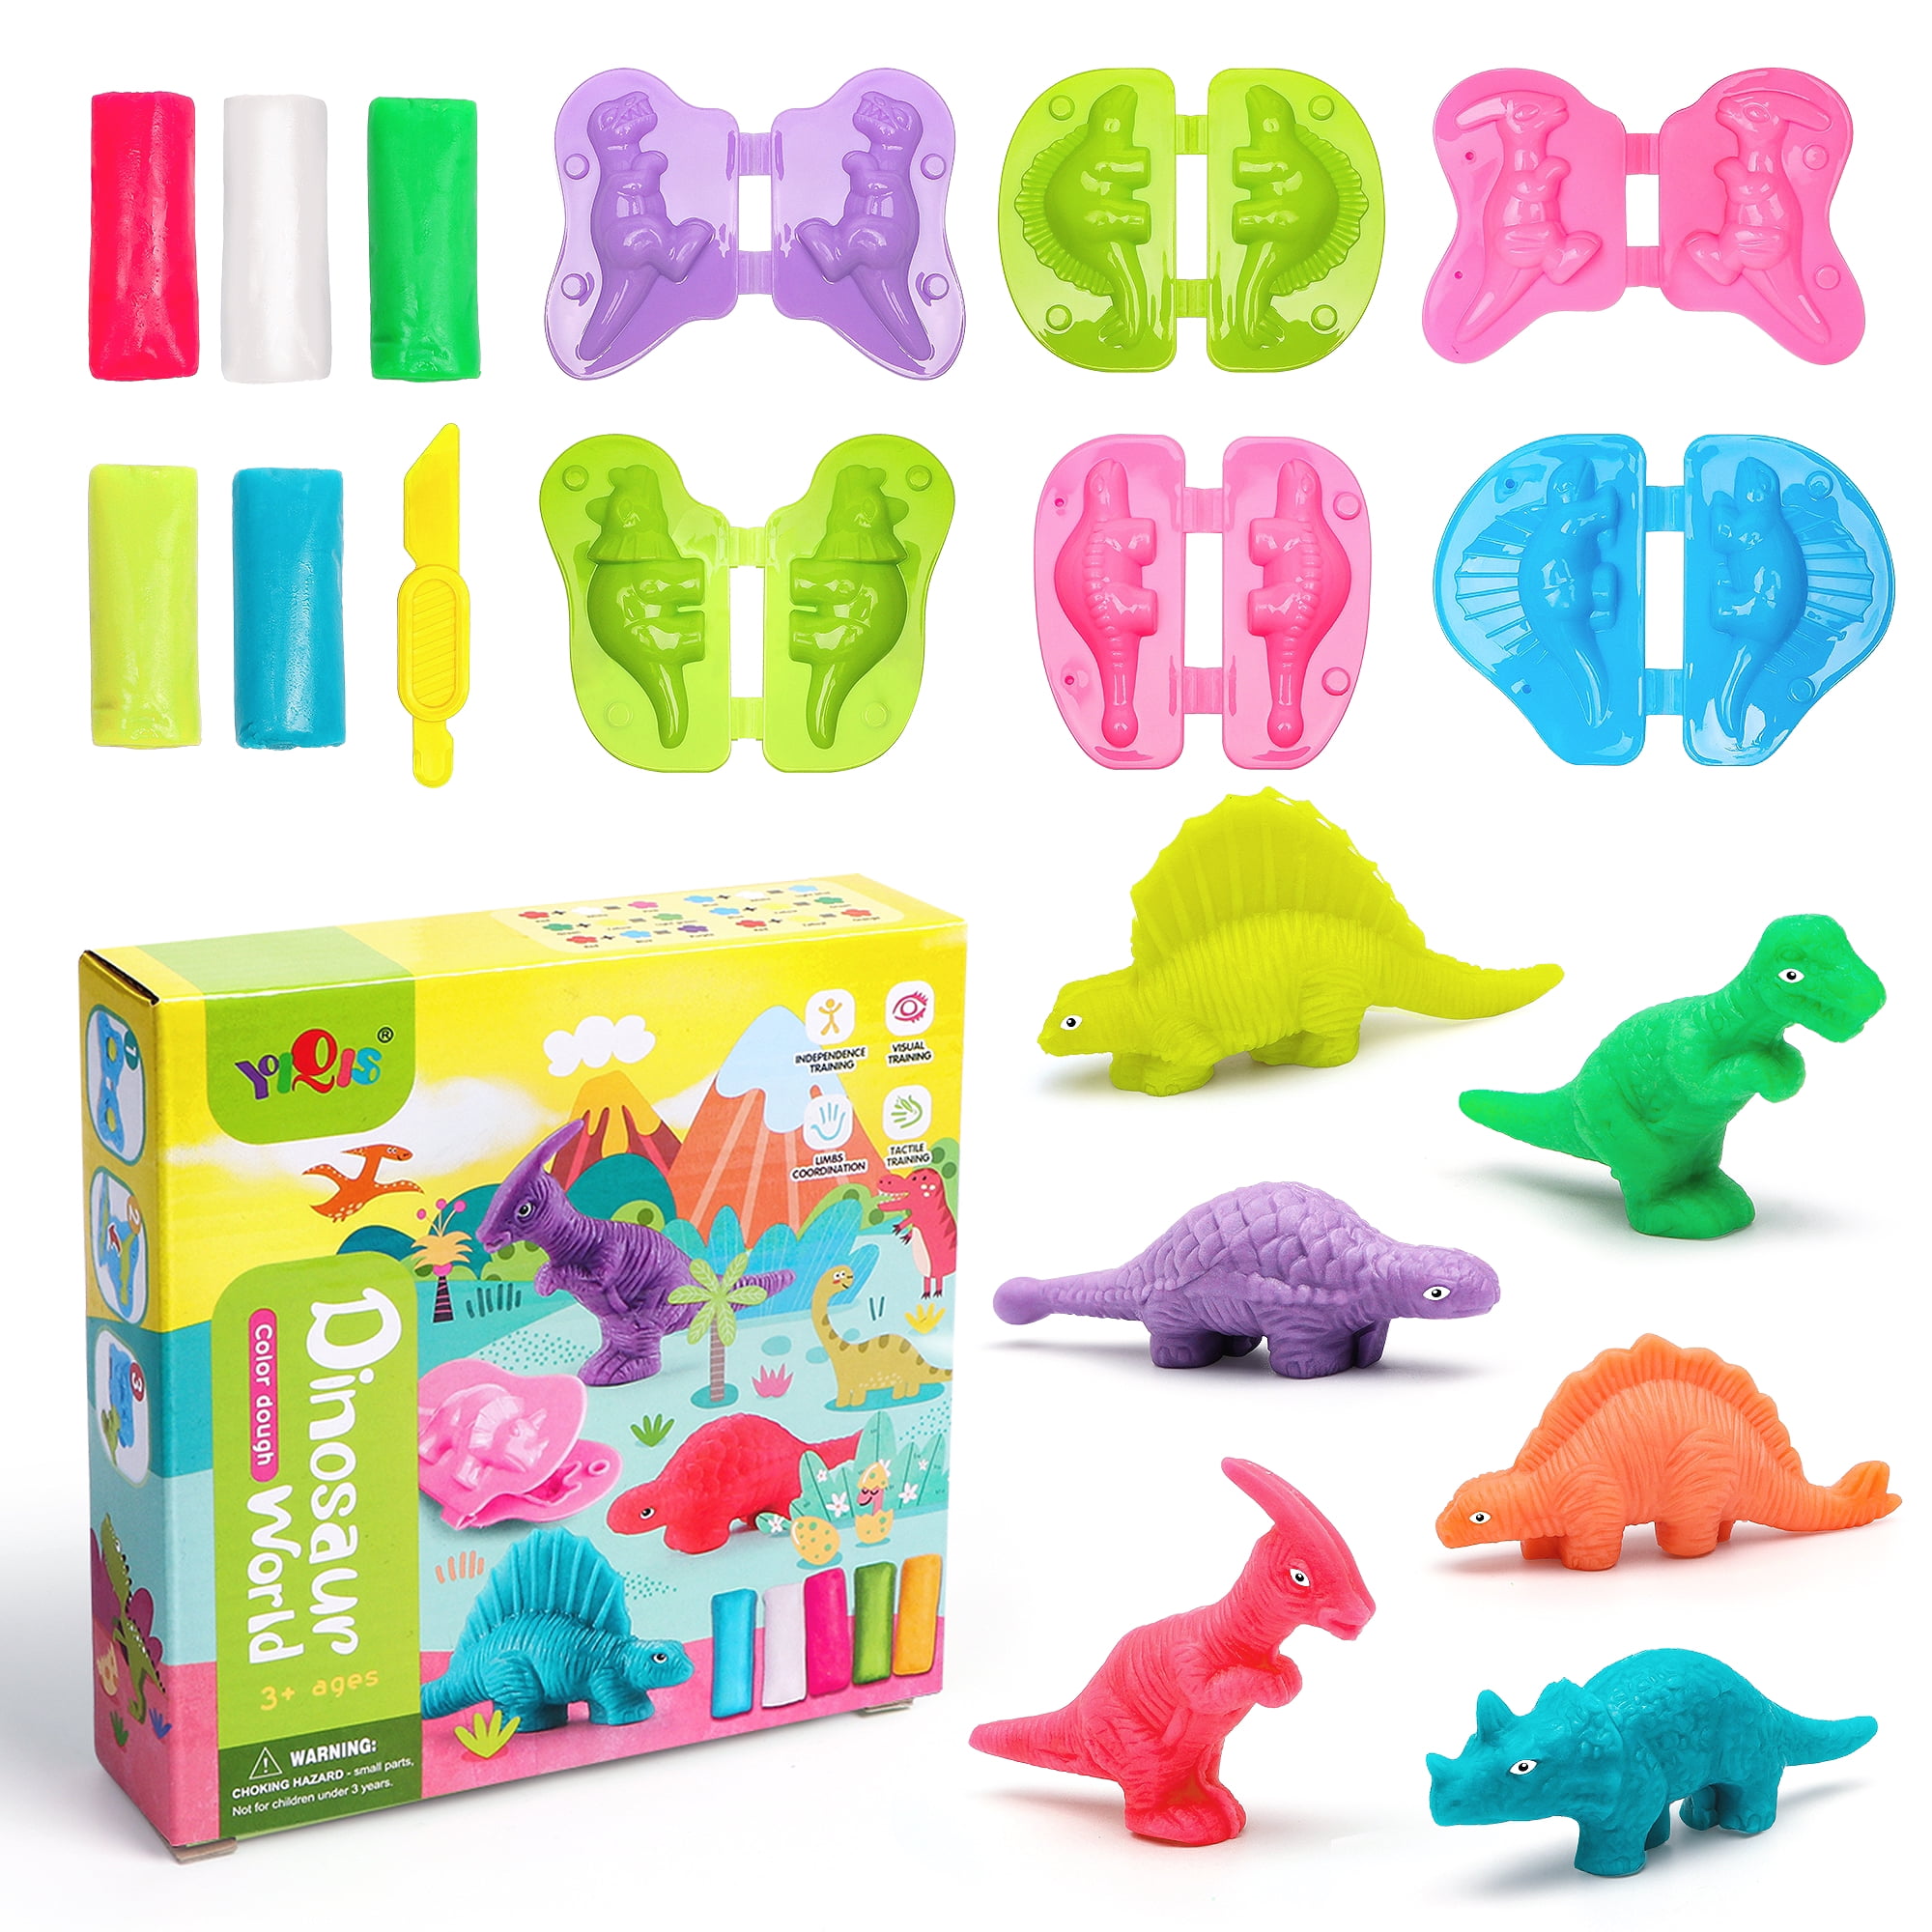 Beefunni Color Clay Dough Dinosaurs Magic Modeling Kit, Multi-color Ultra  Light Play Dough Set, Arts Crafts STEM Toy Gift for Kids